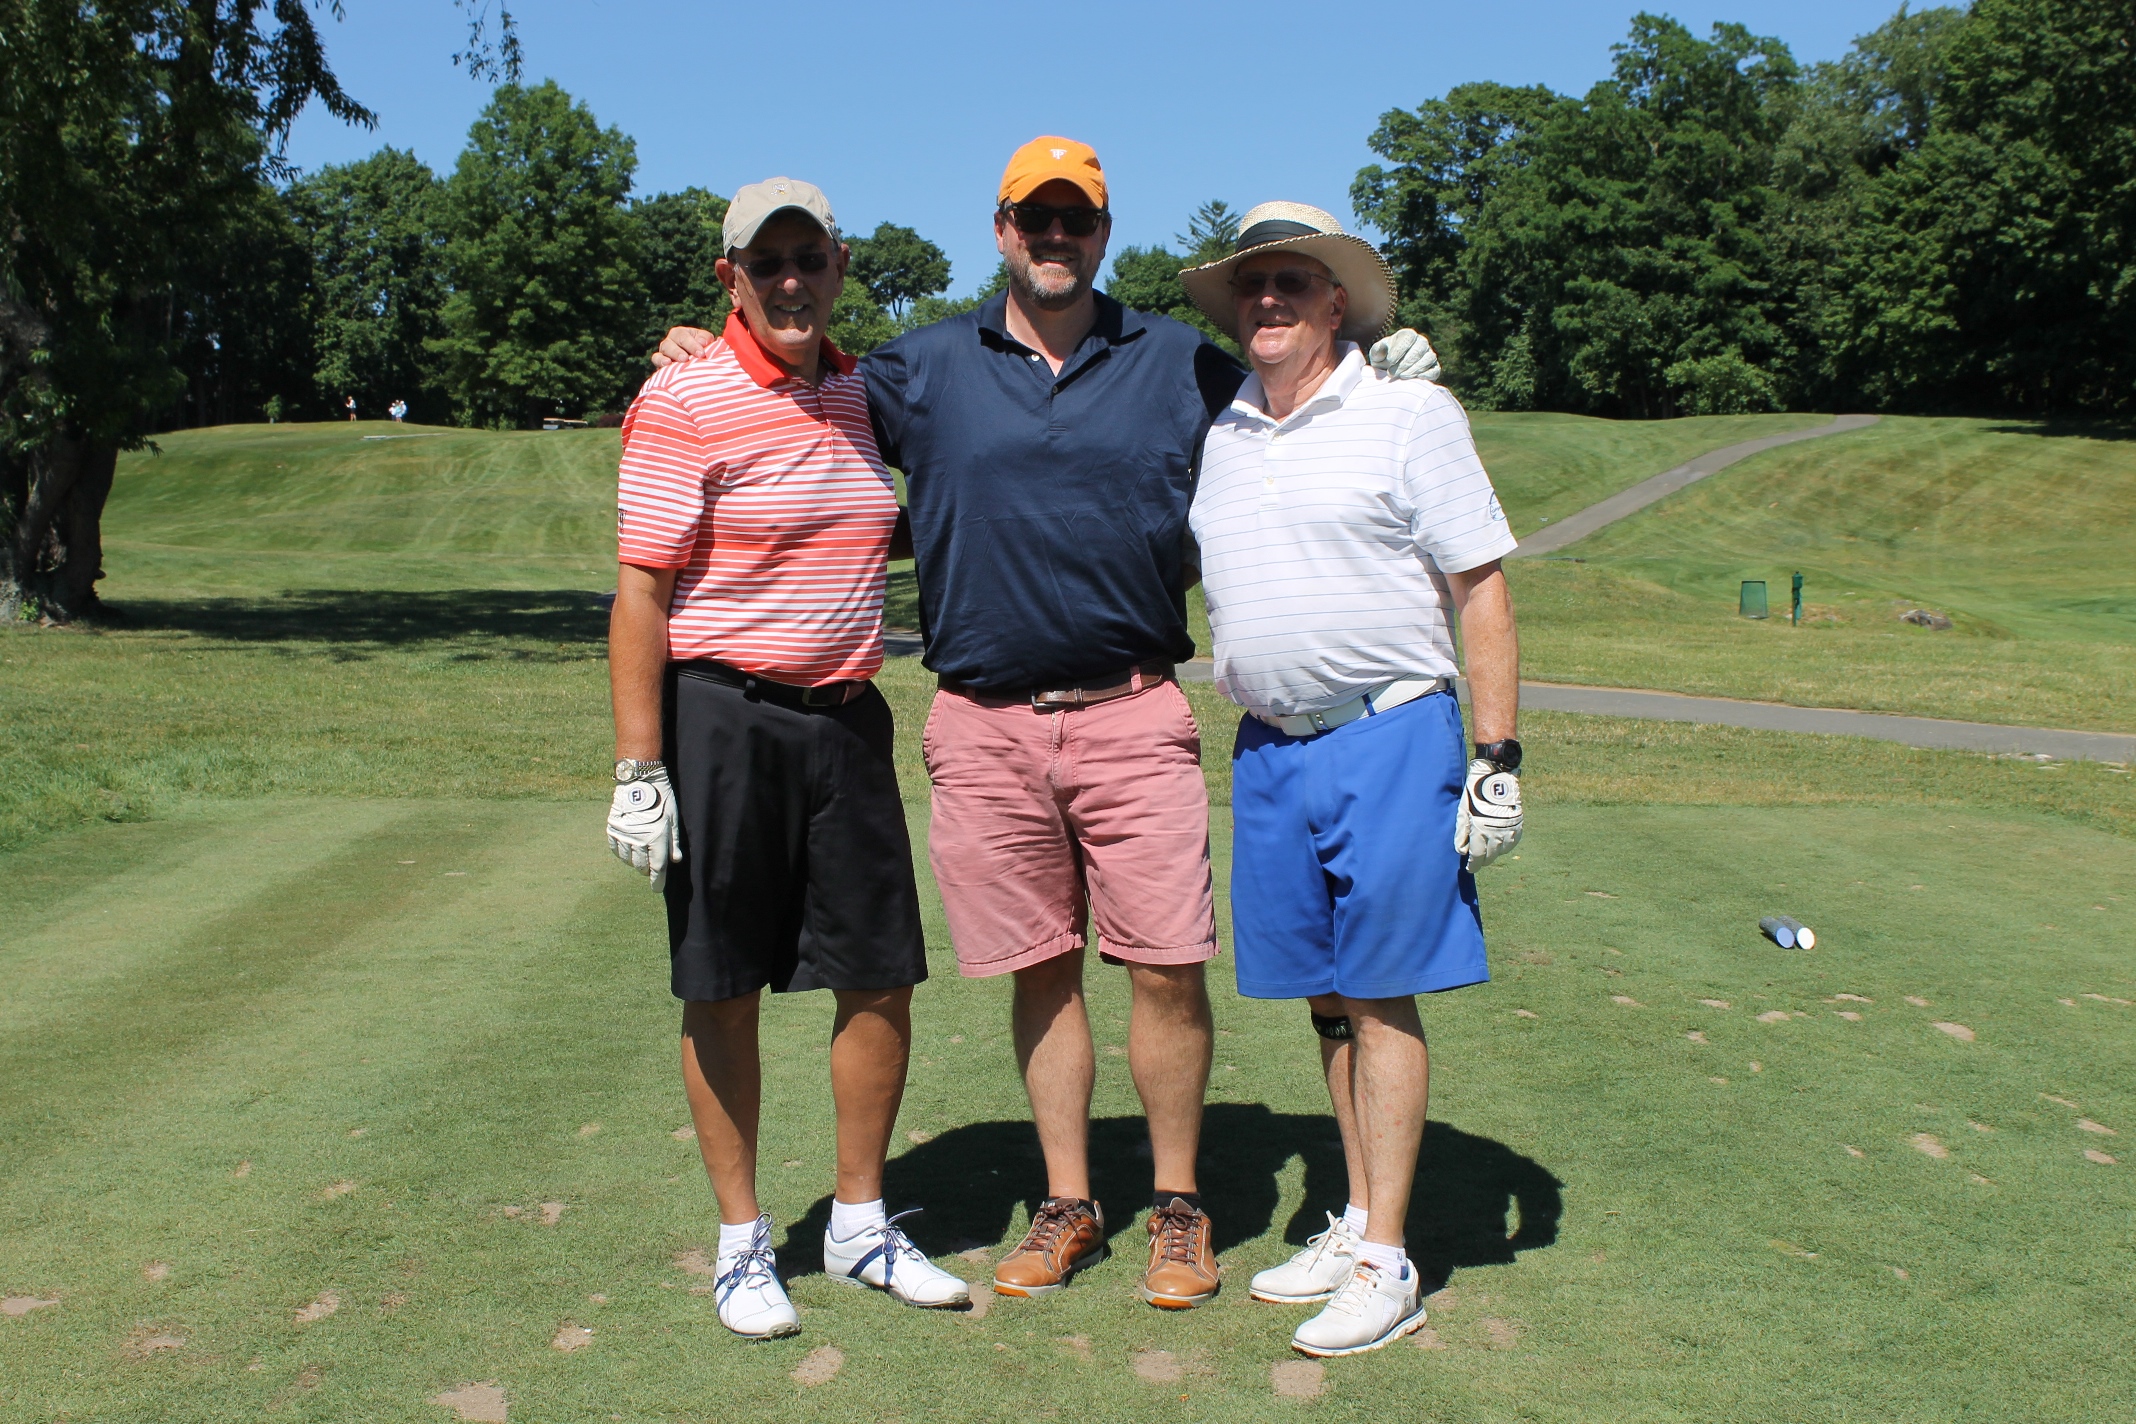 The Hildegarde D. Becher Foundation Inc. group at Hospice of Westchester’s 16th Annual Golf Invitational at Westchester Hills Golf Club in White Plains on Tuesday, June 19.